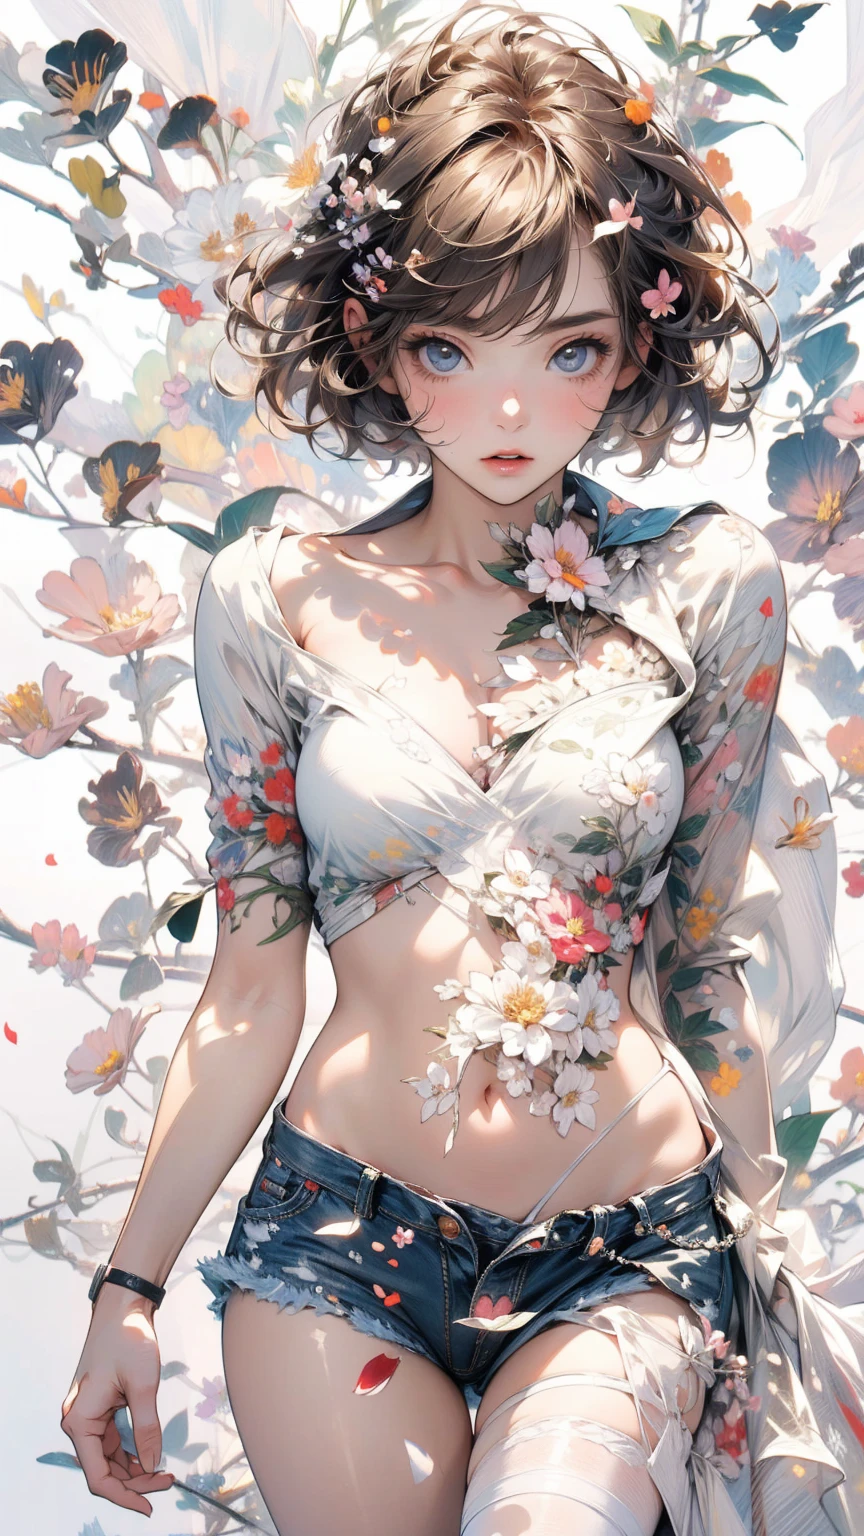 (masterpiece, High resolution, highest quality), Composition from head to thighs:1.3, Upper body focus, A naked 20 year old woman, Short Hair, Disorganized, Collage with petals, abstract design, Impressionism, artistic juxtapositions, White background, mixed-media approach, Anime Style, simple lines, Digital Painting,